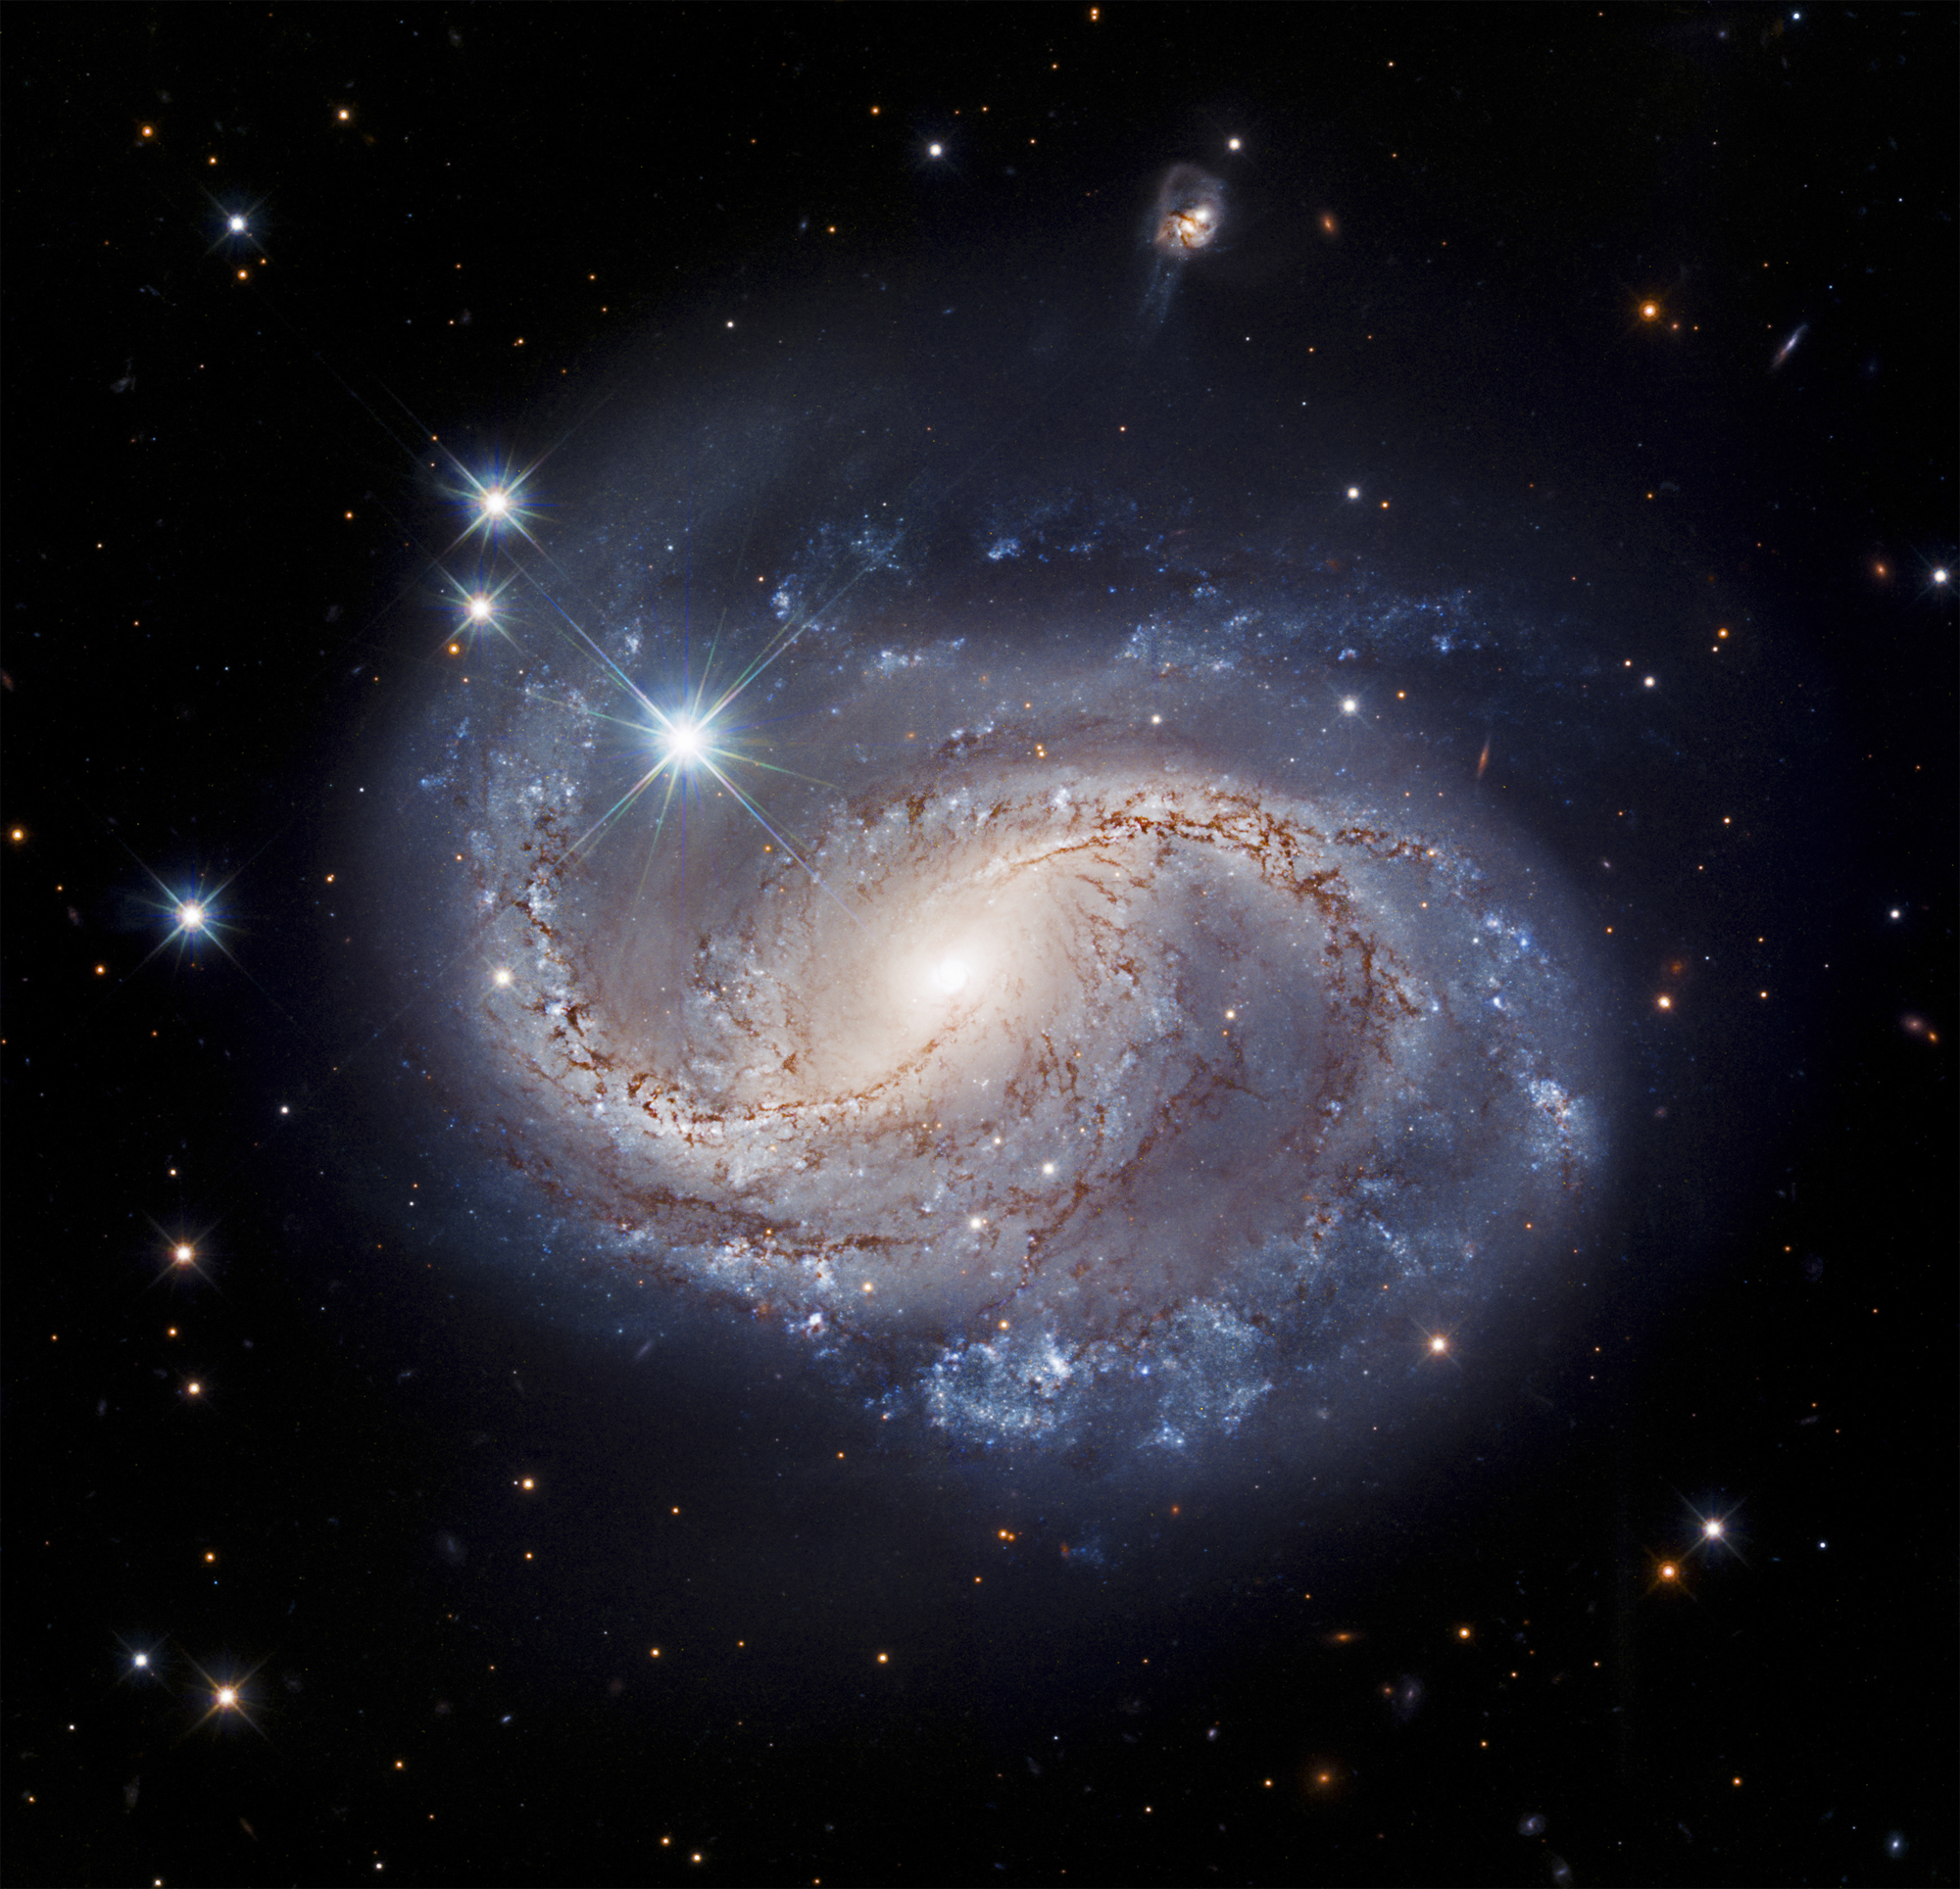 A photo taken by the Hubble Space Telescope of the spiral galaxy NGC 6956.